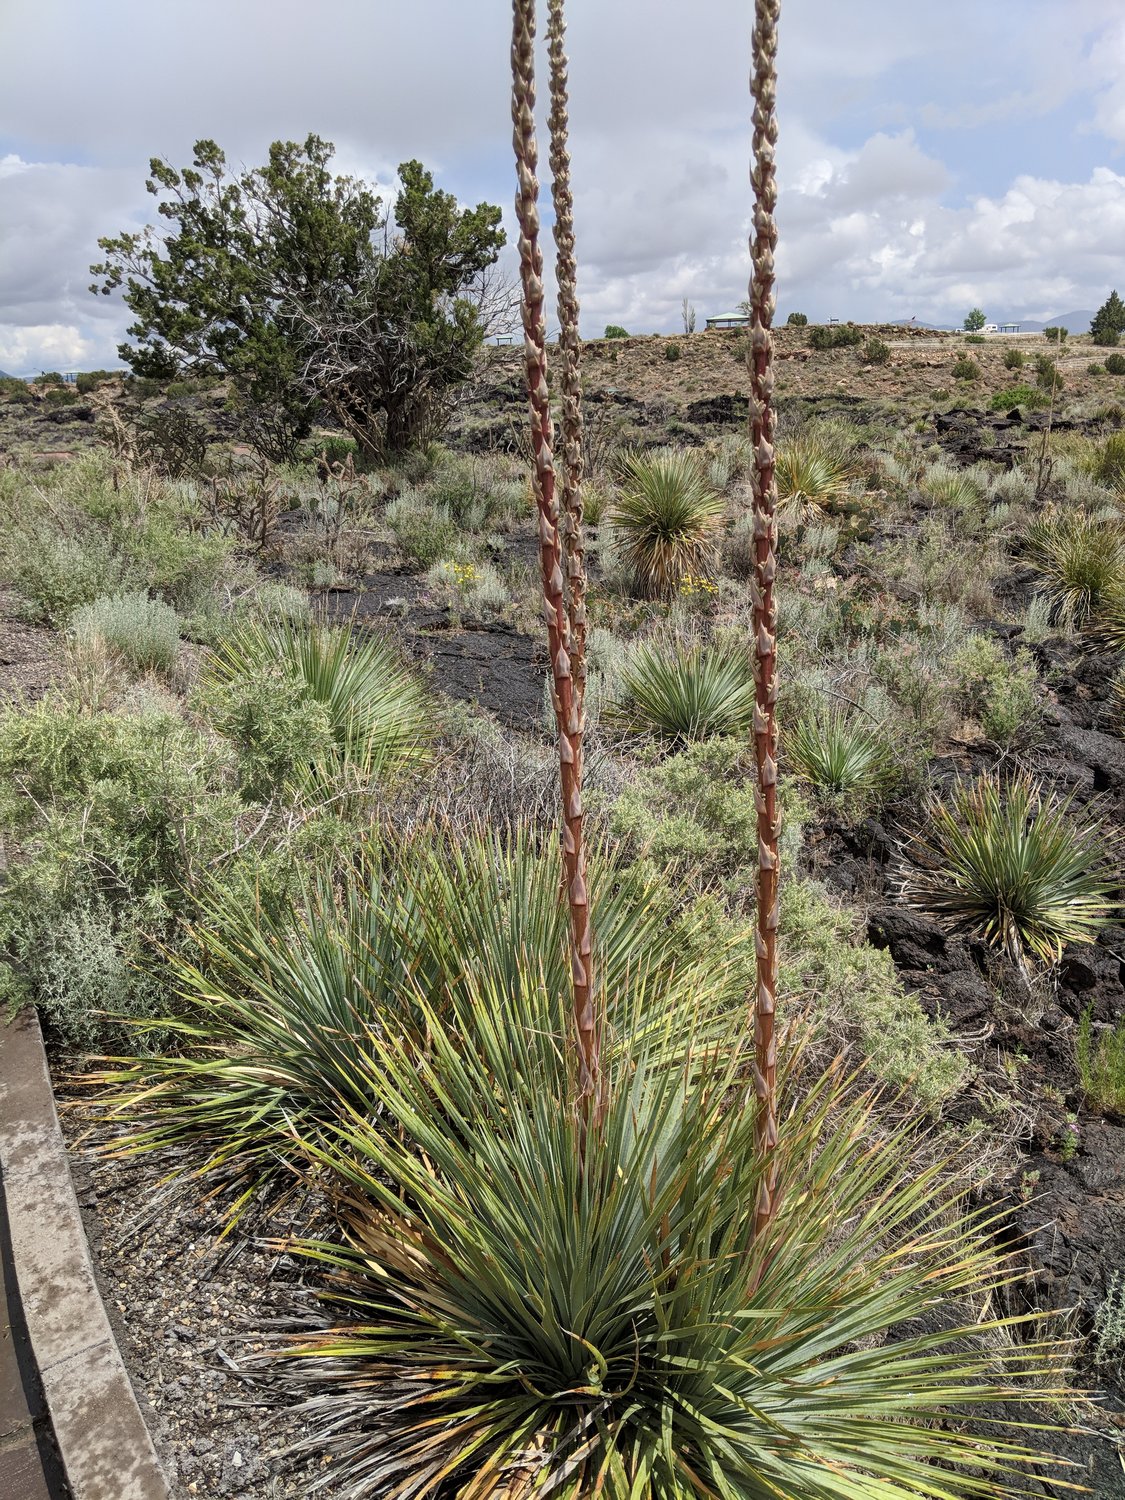 Yucca plants, with stalks intact, are one of the plant species you can see at Valley of the Fires.